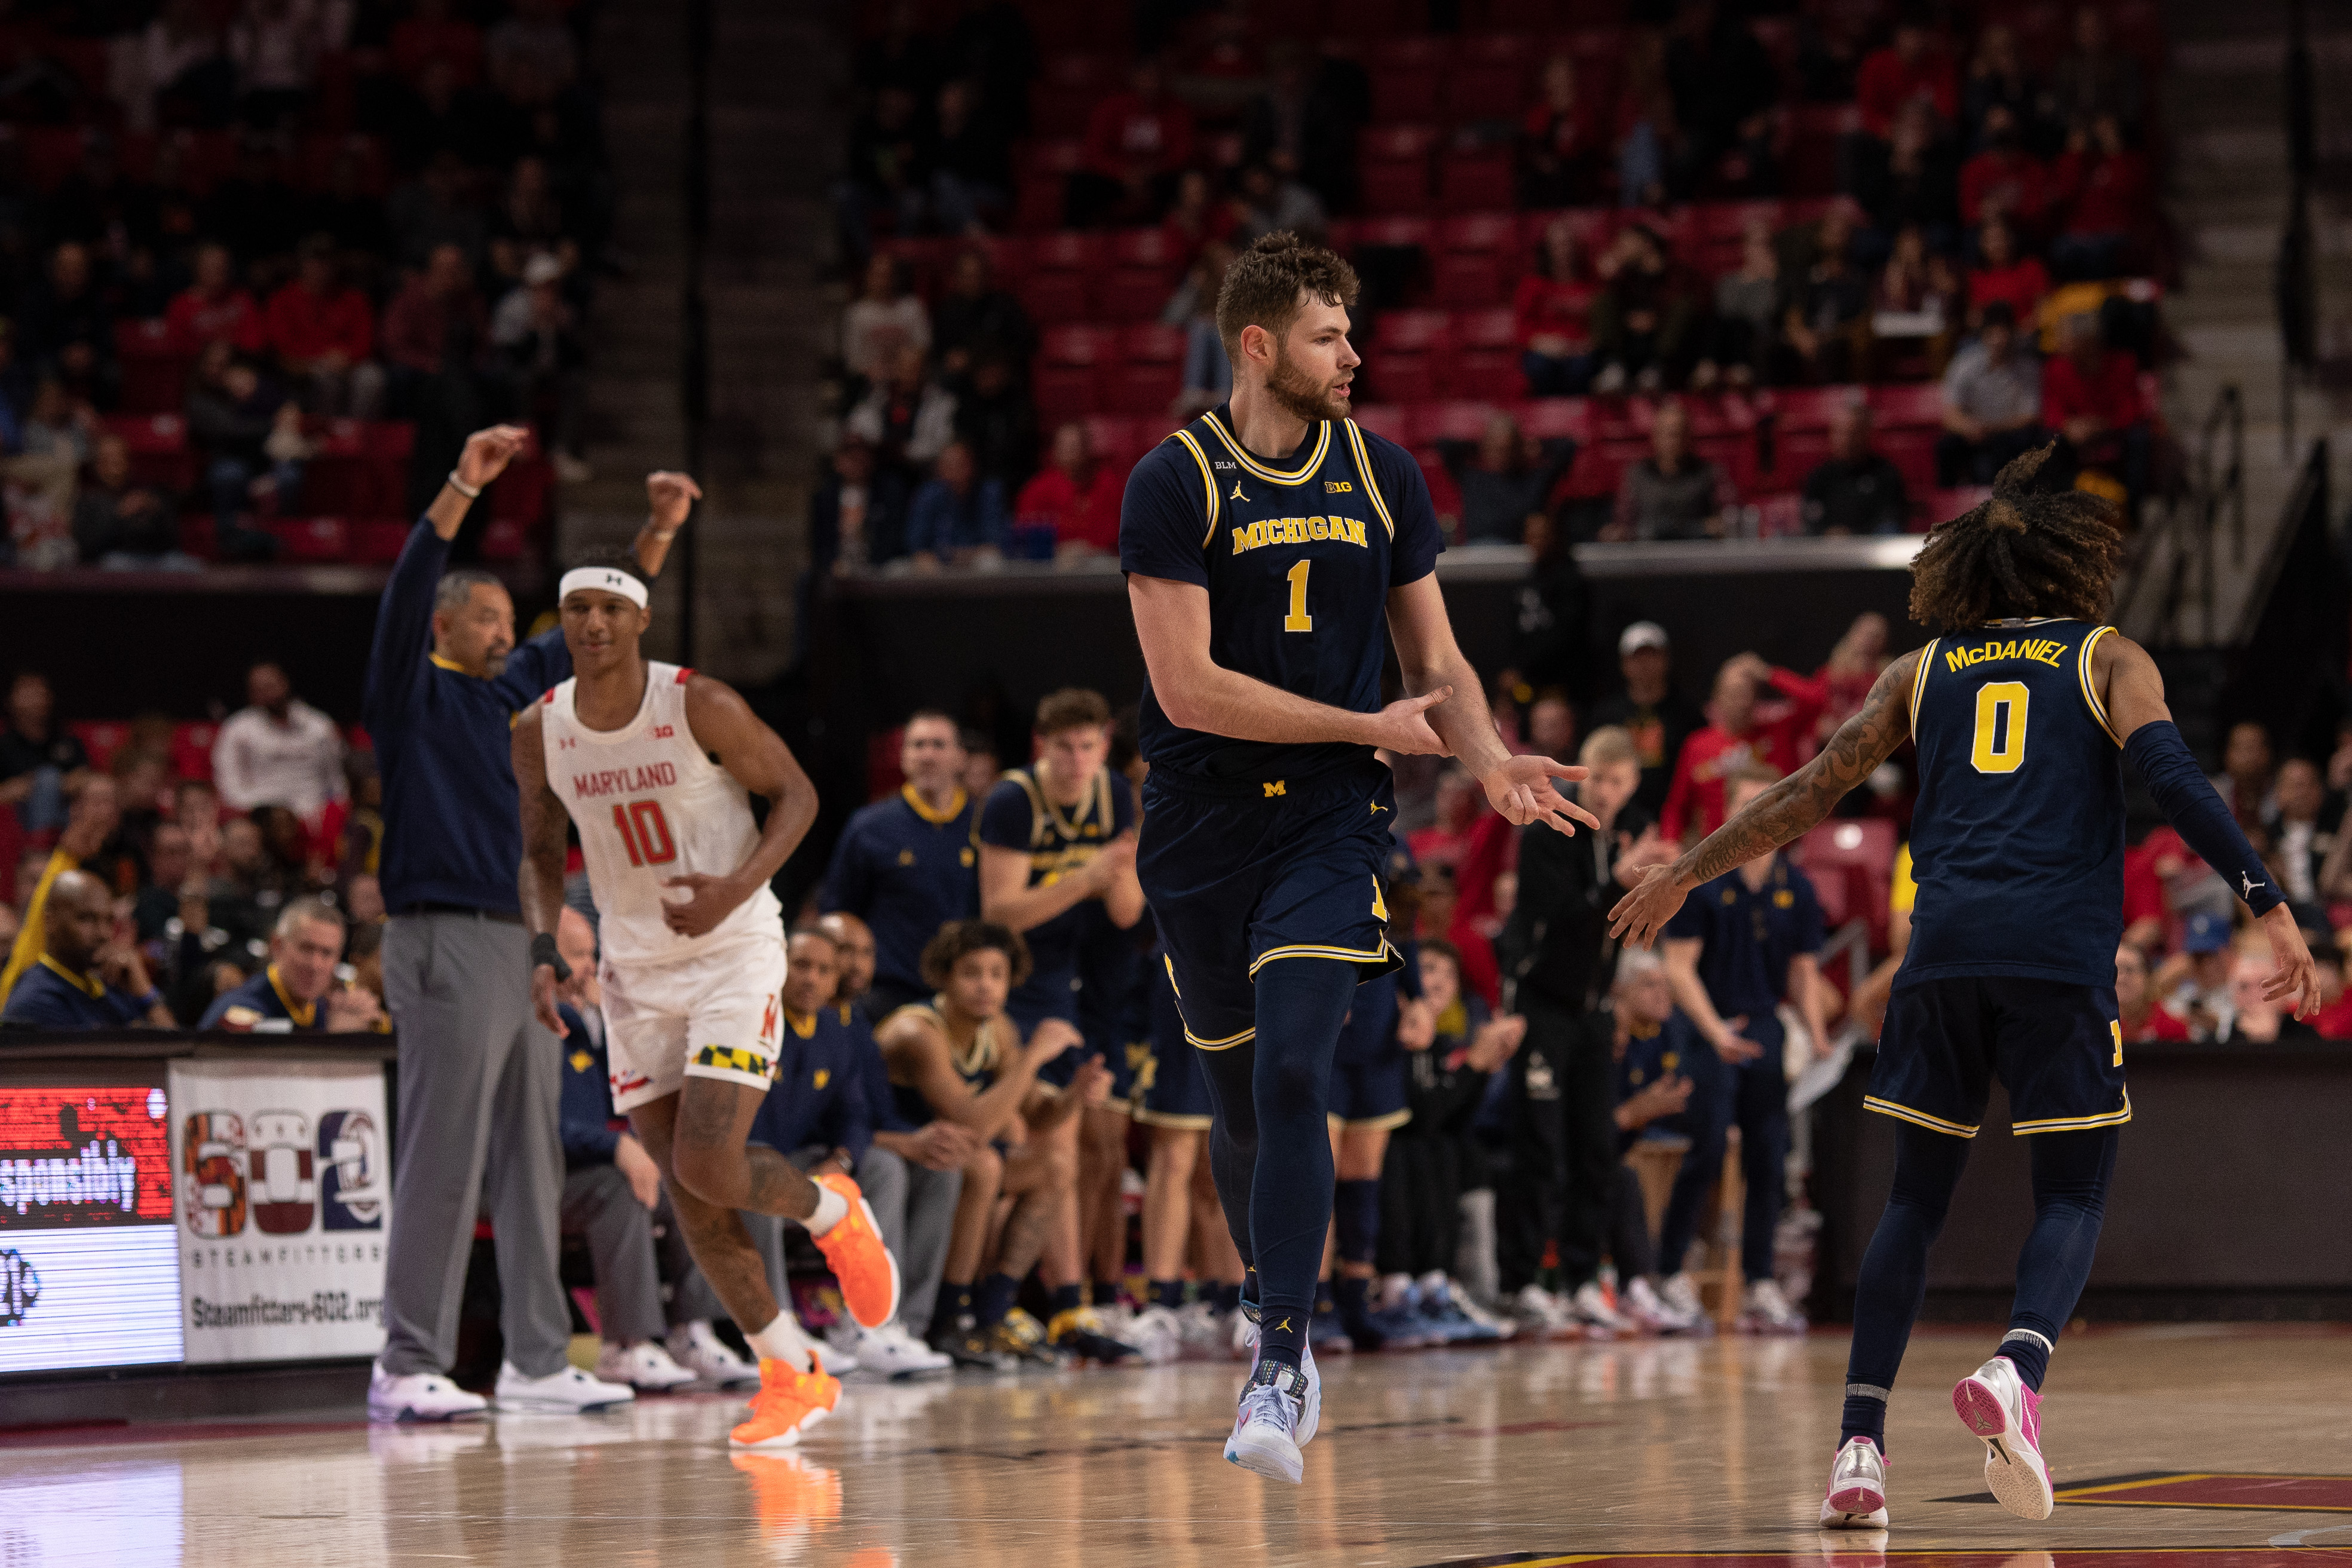 Watch Michigan at Indiana: Stream men's college basketball live - How ...